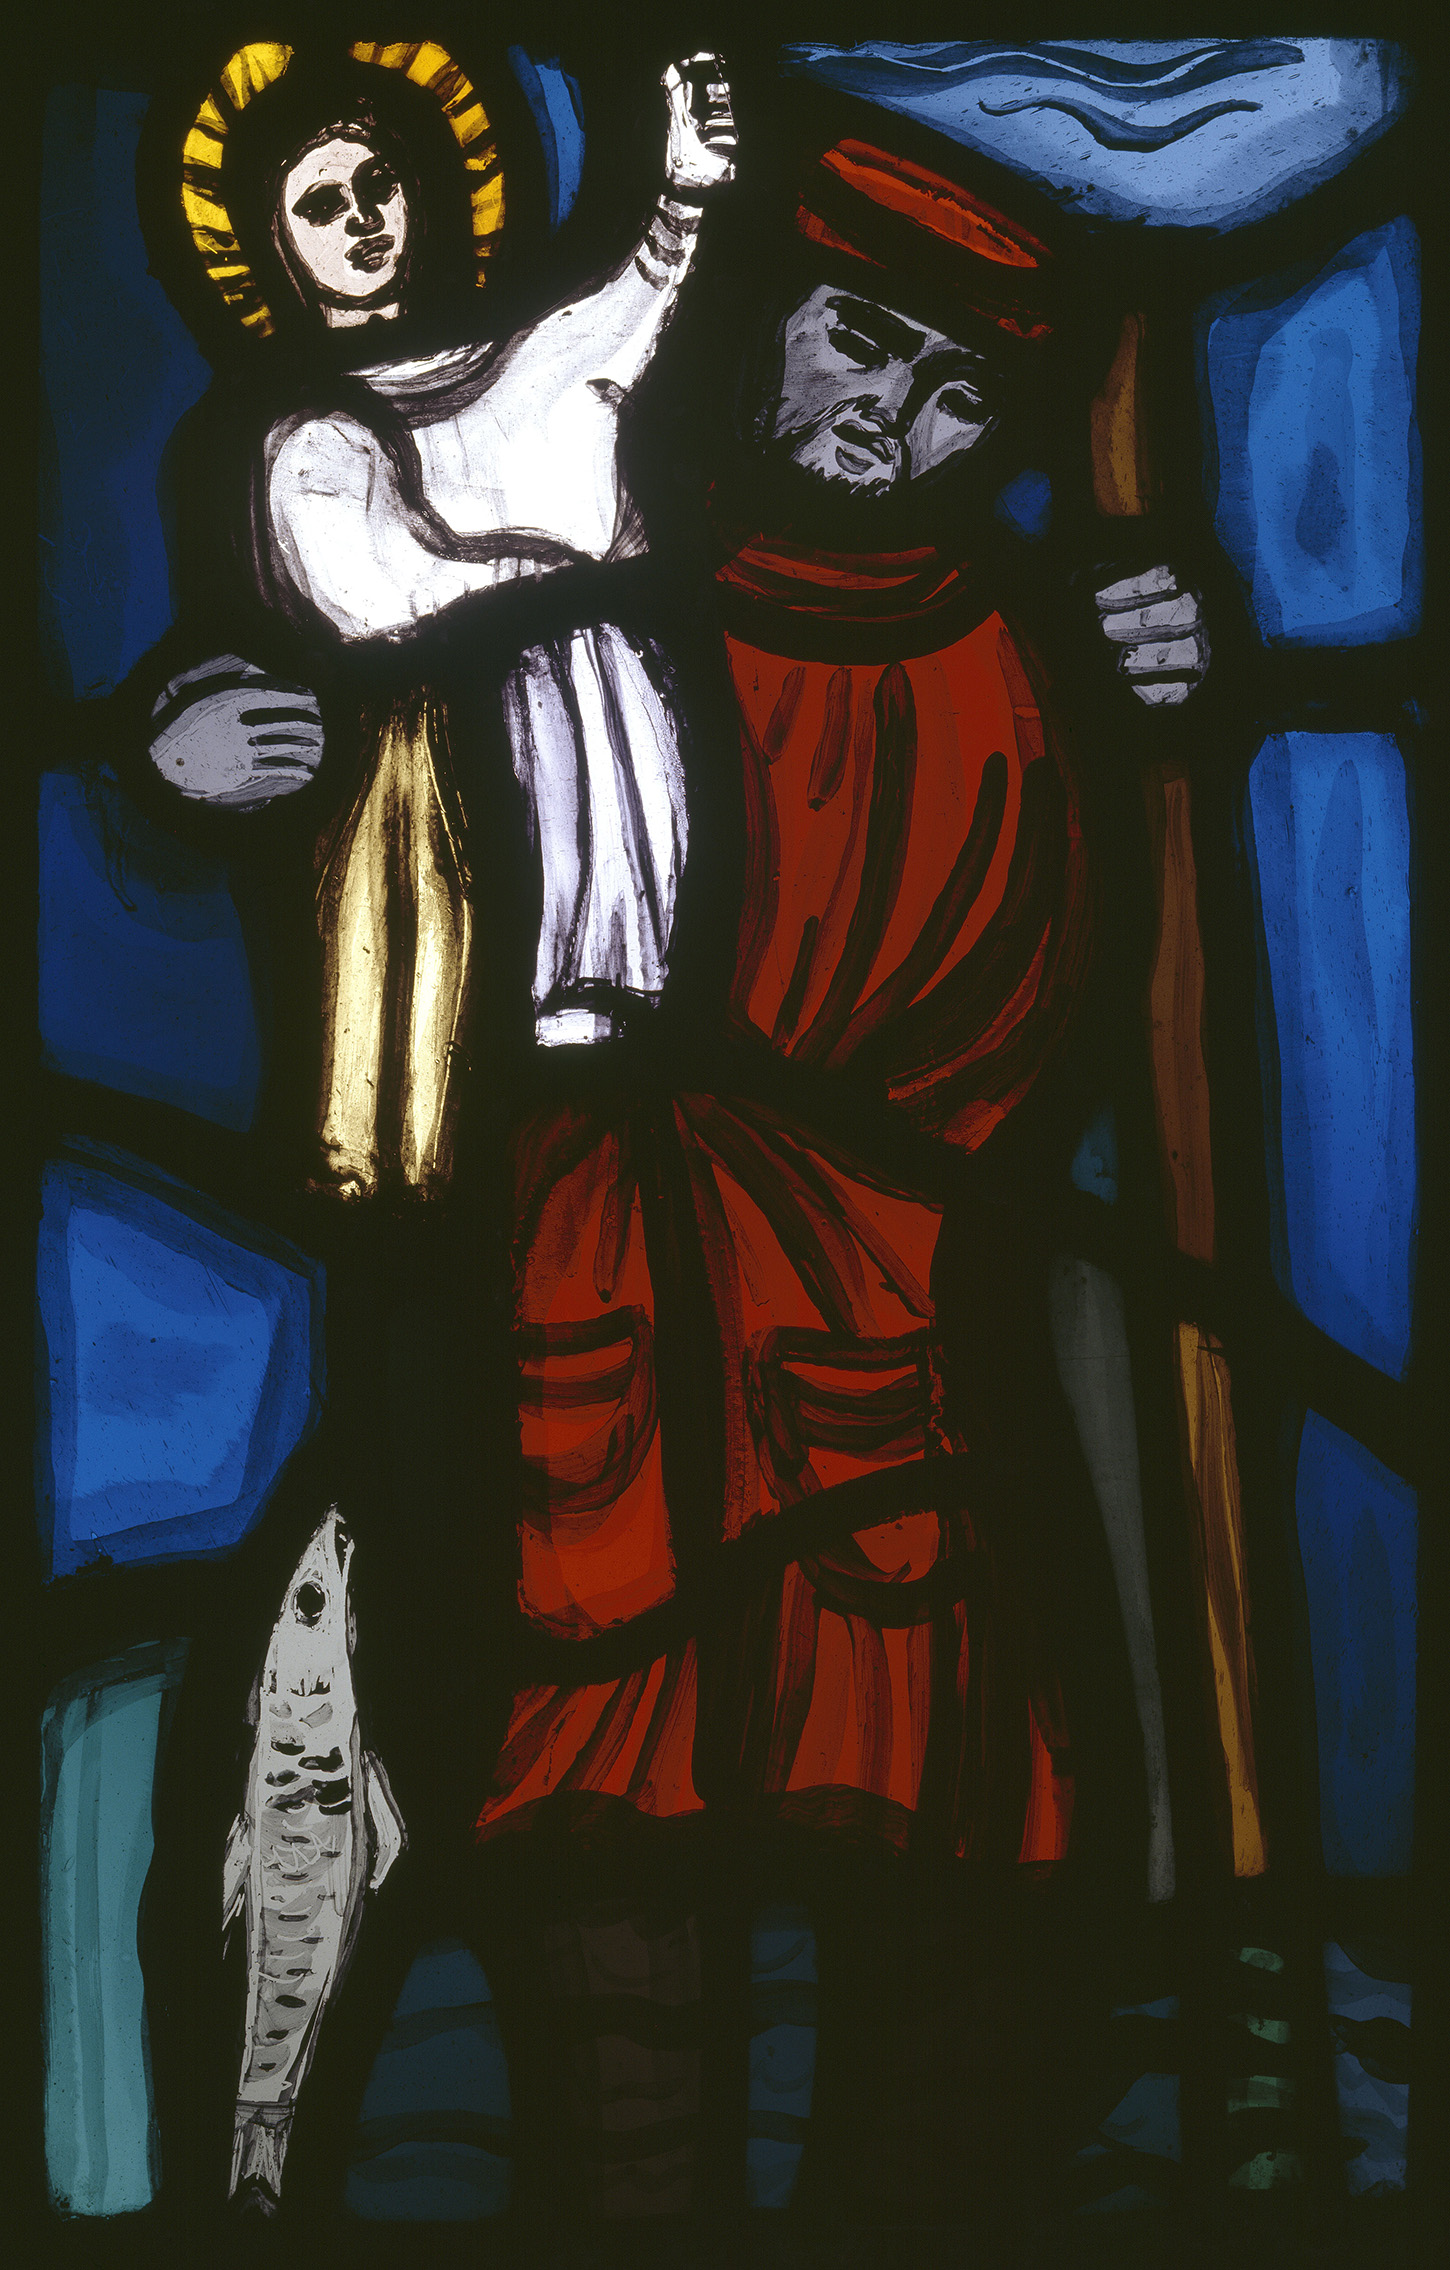 A stained glass work showing a figure in red, holding a staff, holding aloft a child in white, with a halo, who is raising a hand. At the bottom left of the glass is a fish.